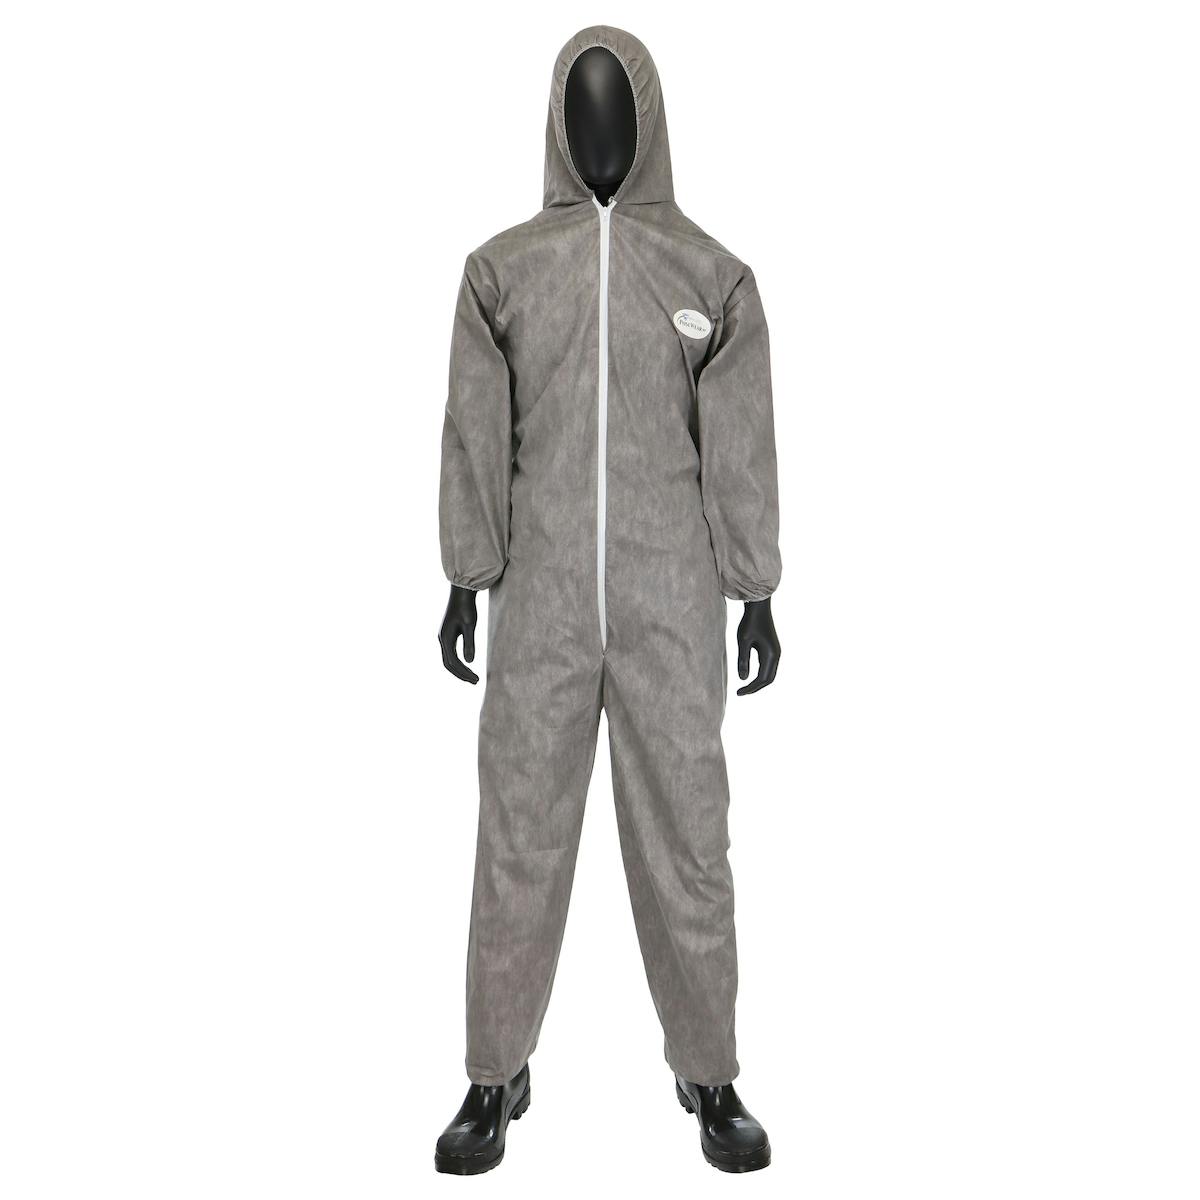 PosiWear M3 Coverall with Hood, Elastic Wrists & Ankles 50 gsm, Gray (C3906)